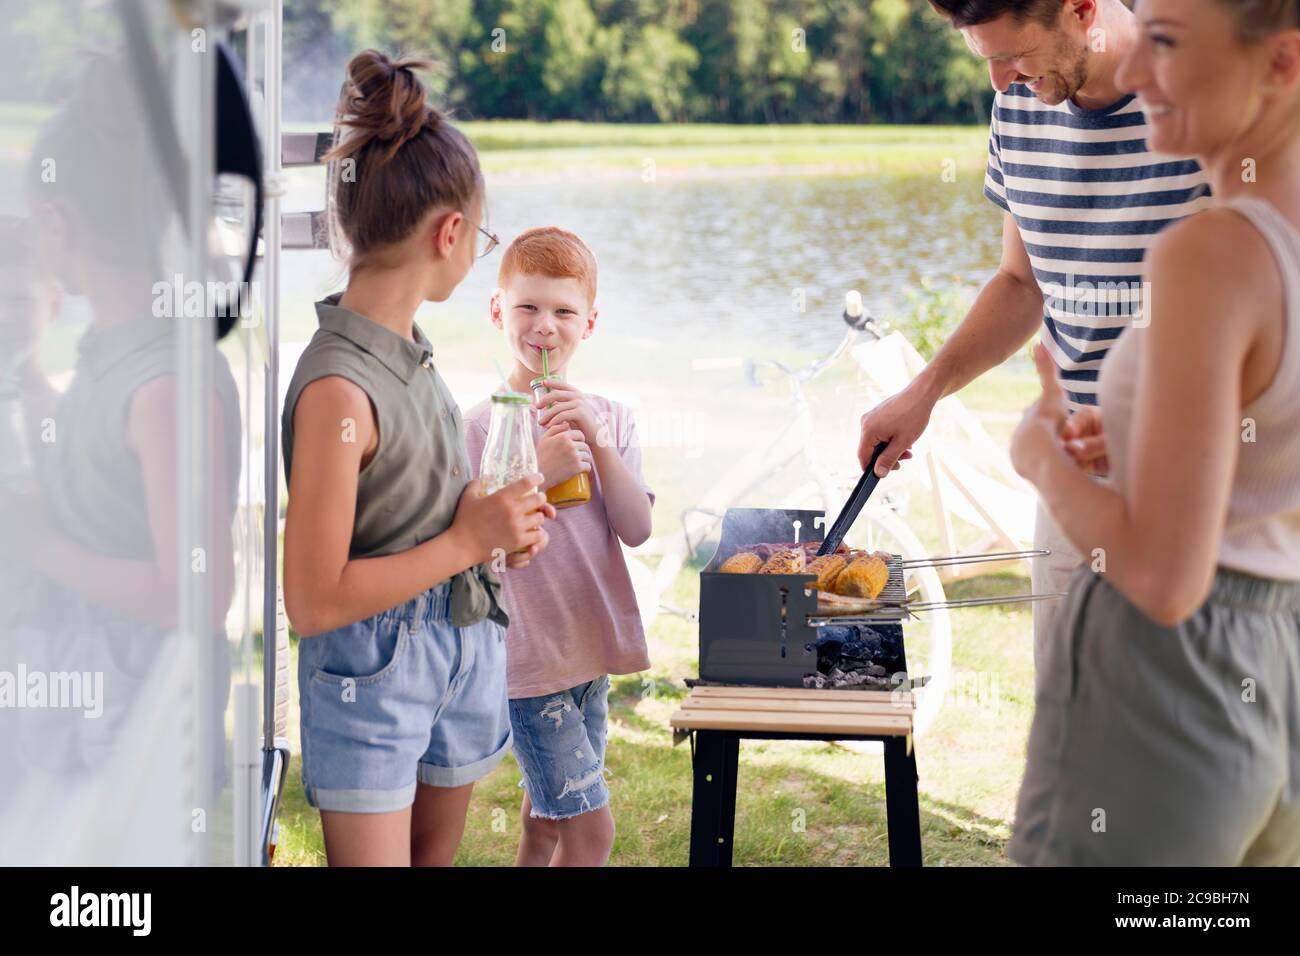 Family having barbecue during camper trip Stock Photo